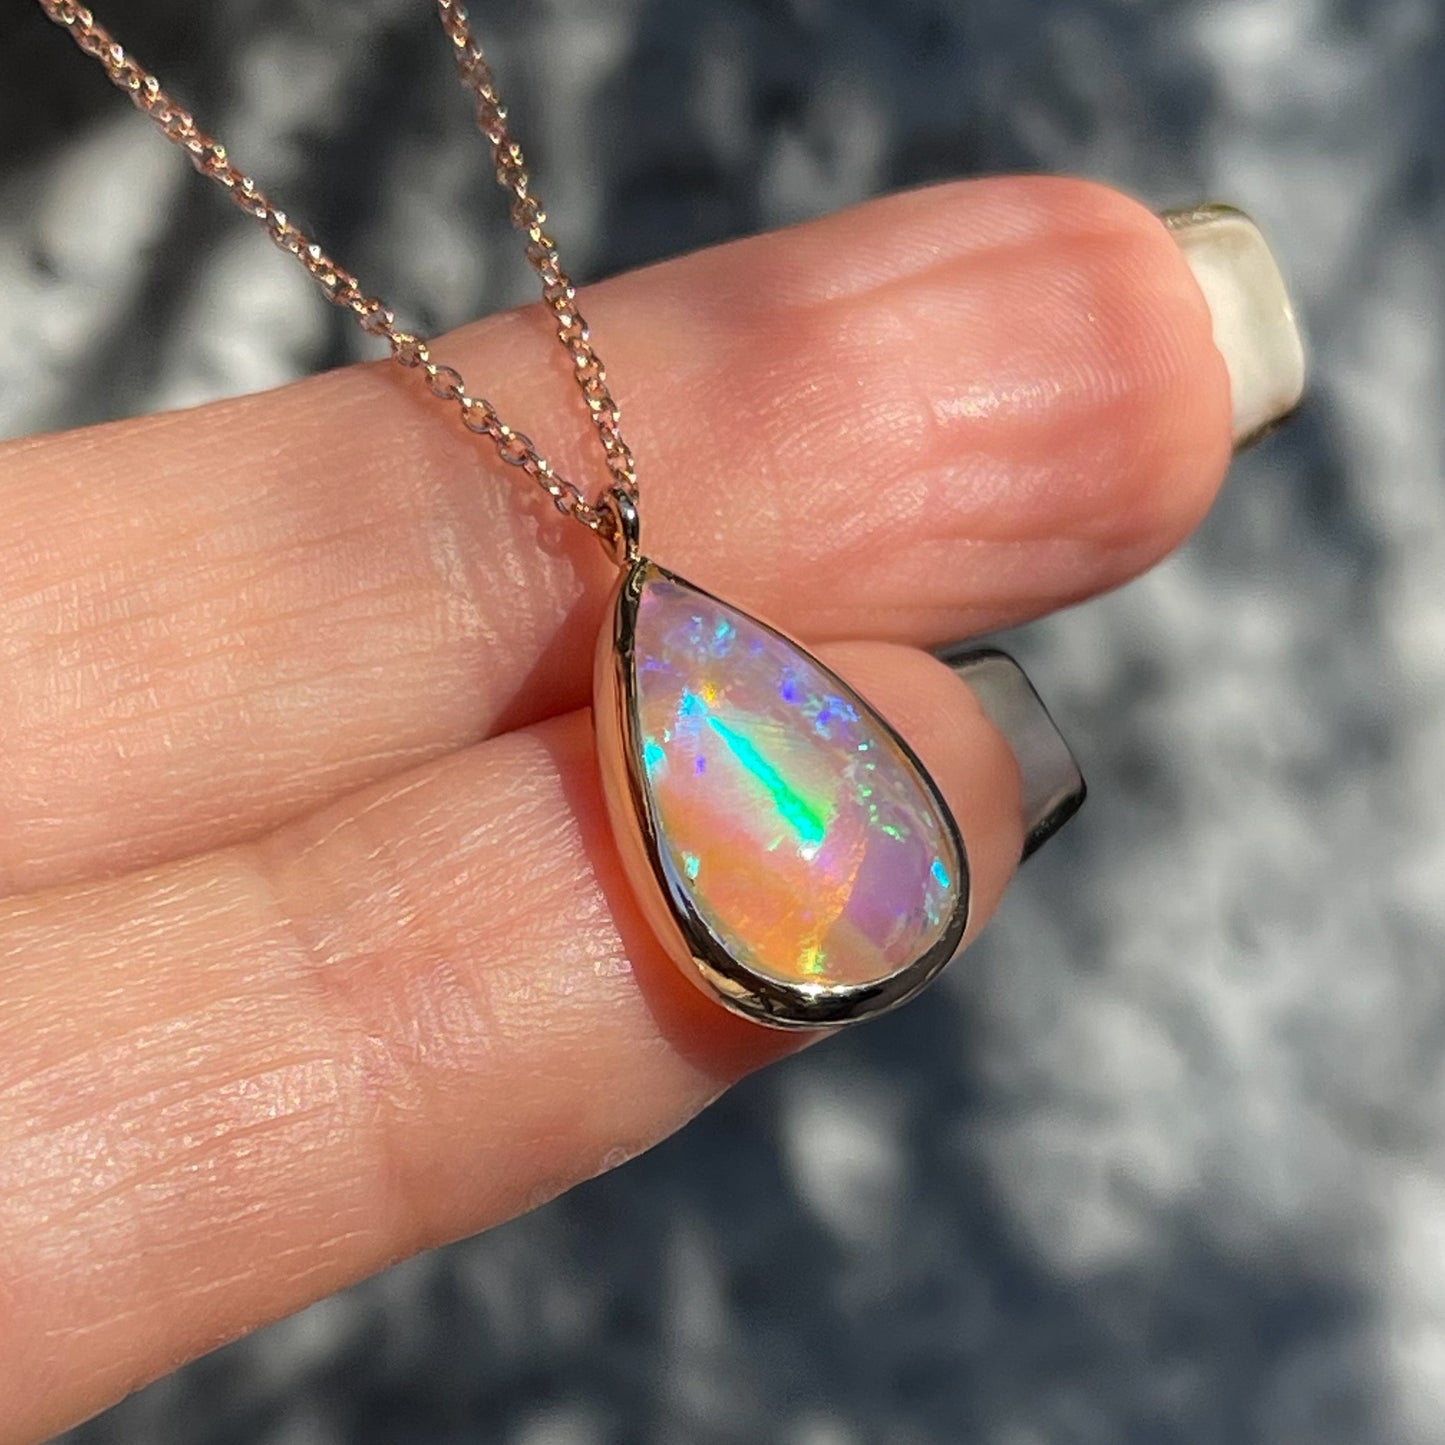 An Australian Opal Necklace by NIXIN Jewelry. The pink opal rests in a rose gold bezel setting.